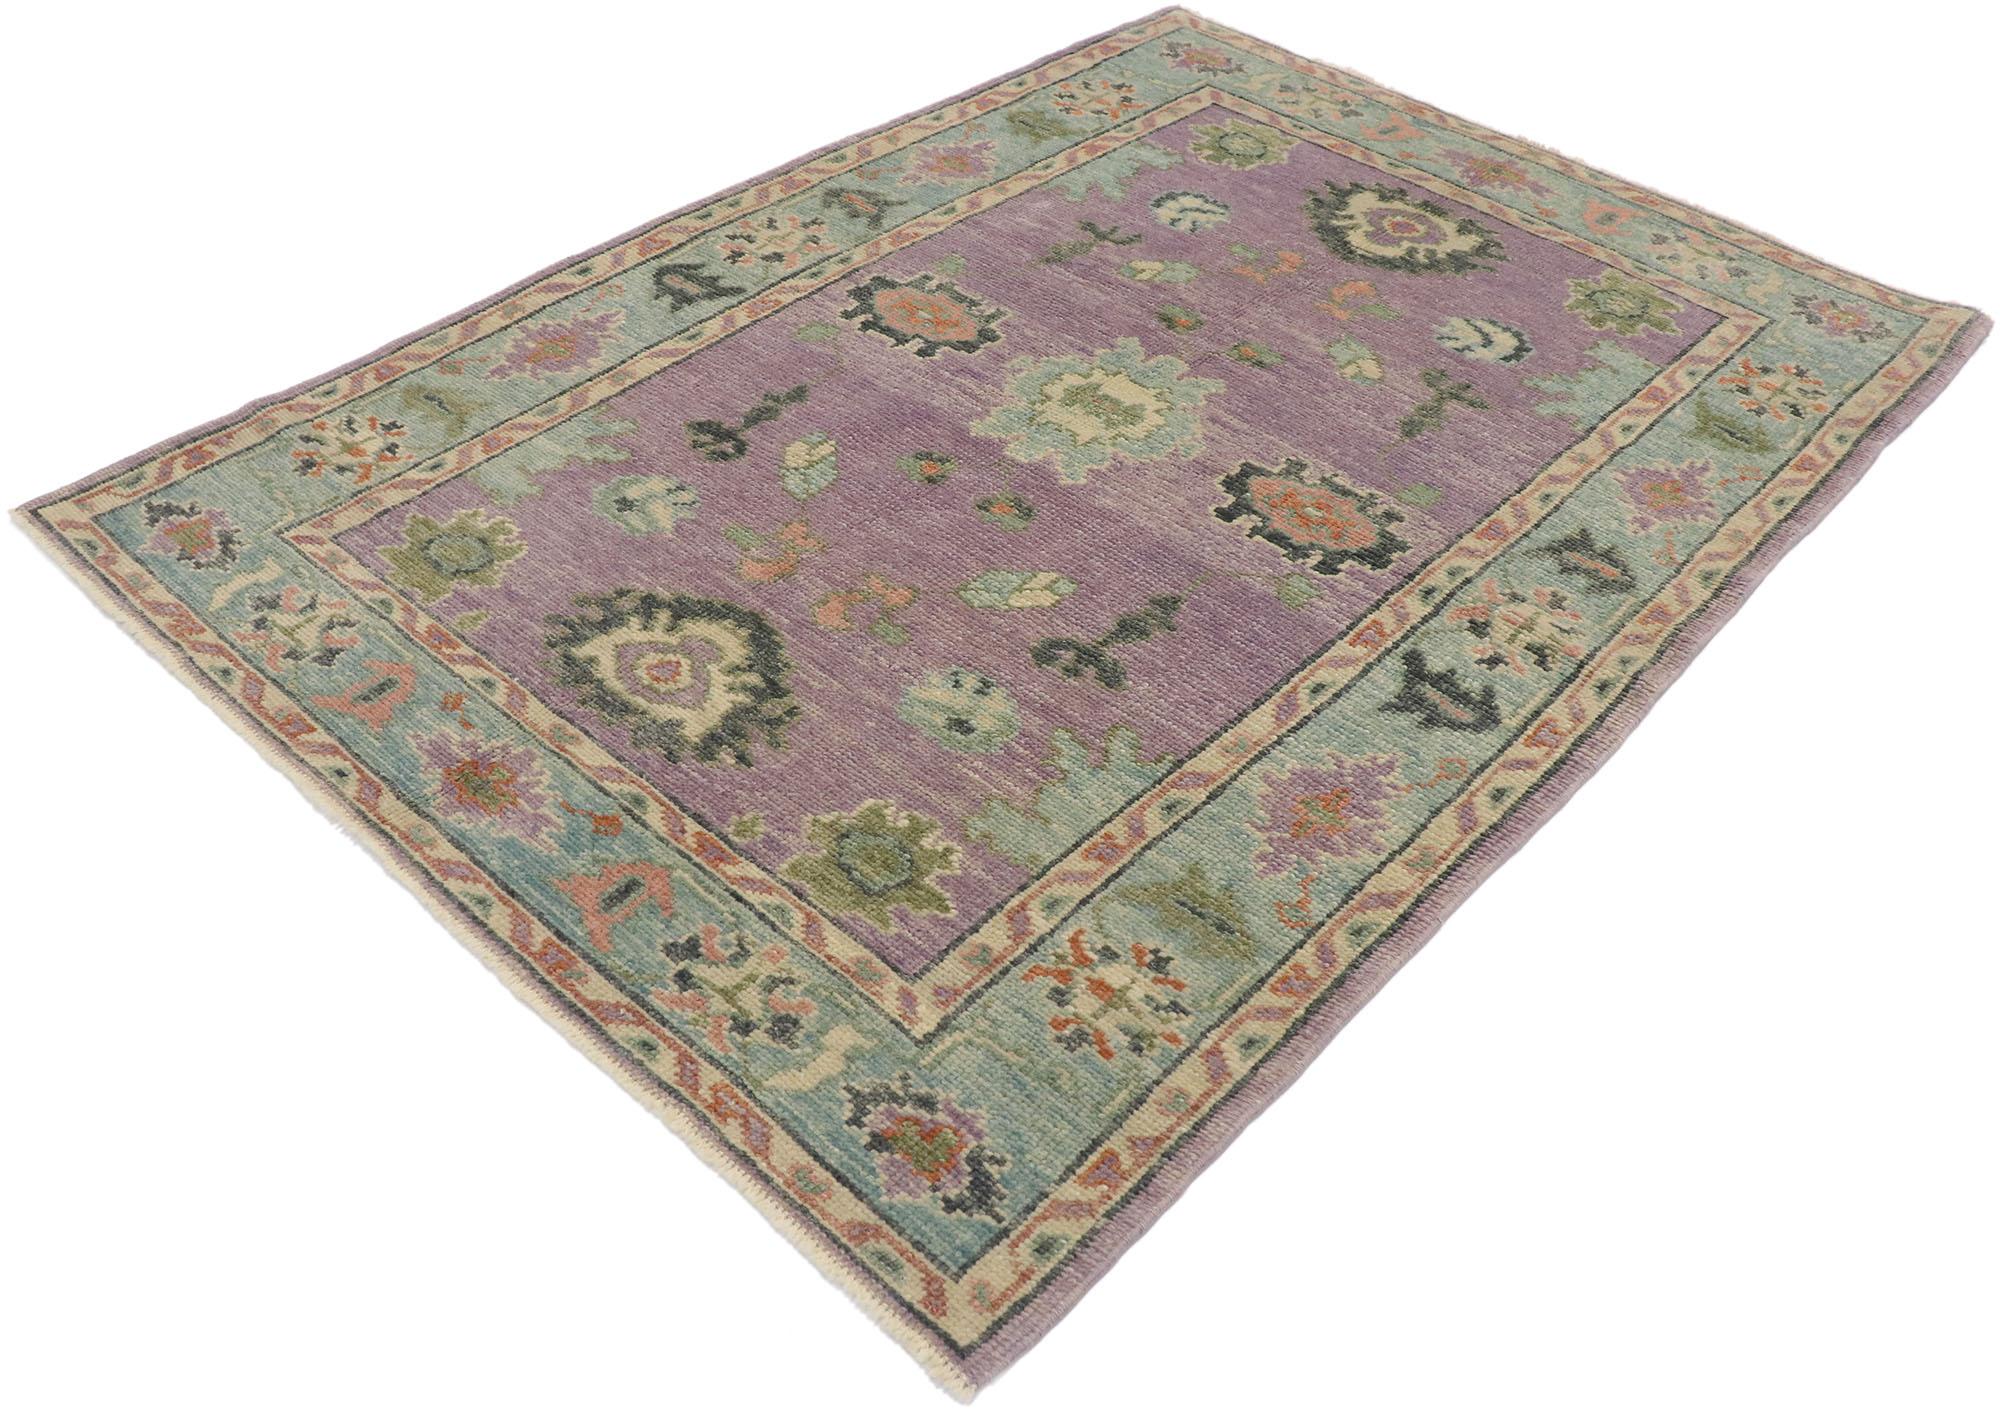 53380, new contemporary Turkish Oushak rug with modern style and pastel colors 04'02 x 05'10. Blending elements from the modern world with pastel colors, this hand knotted wool contemporary Turkish Oushak rug will boost the coziness factor in nearly